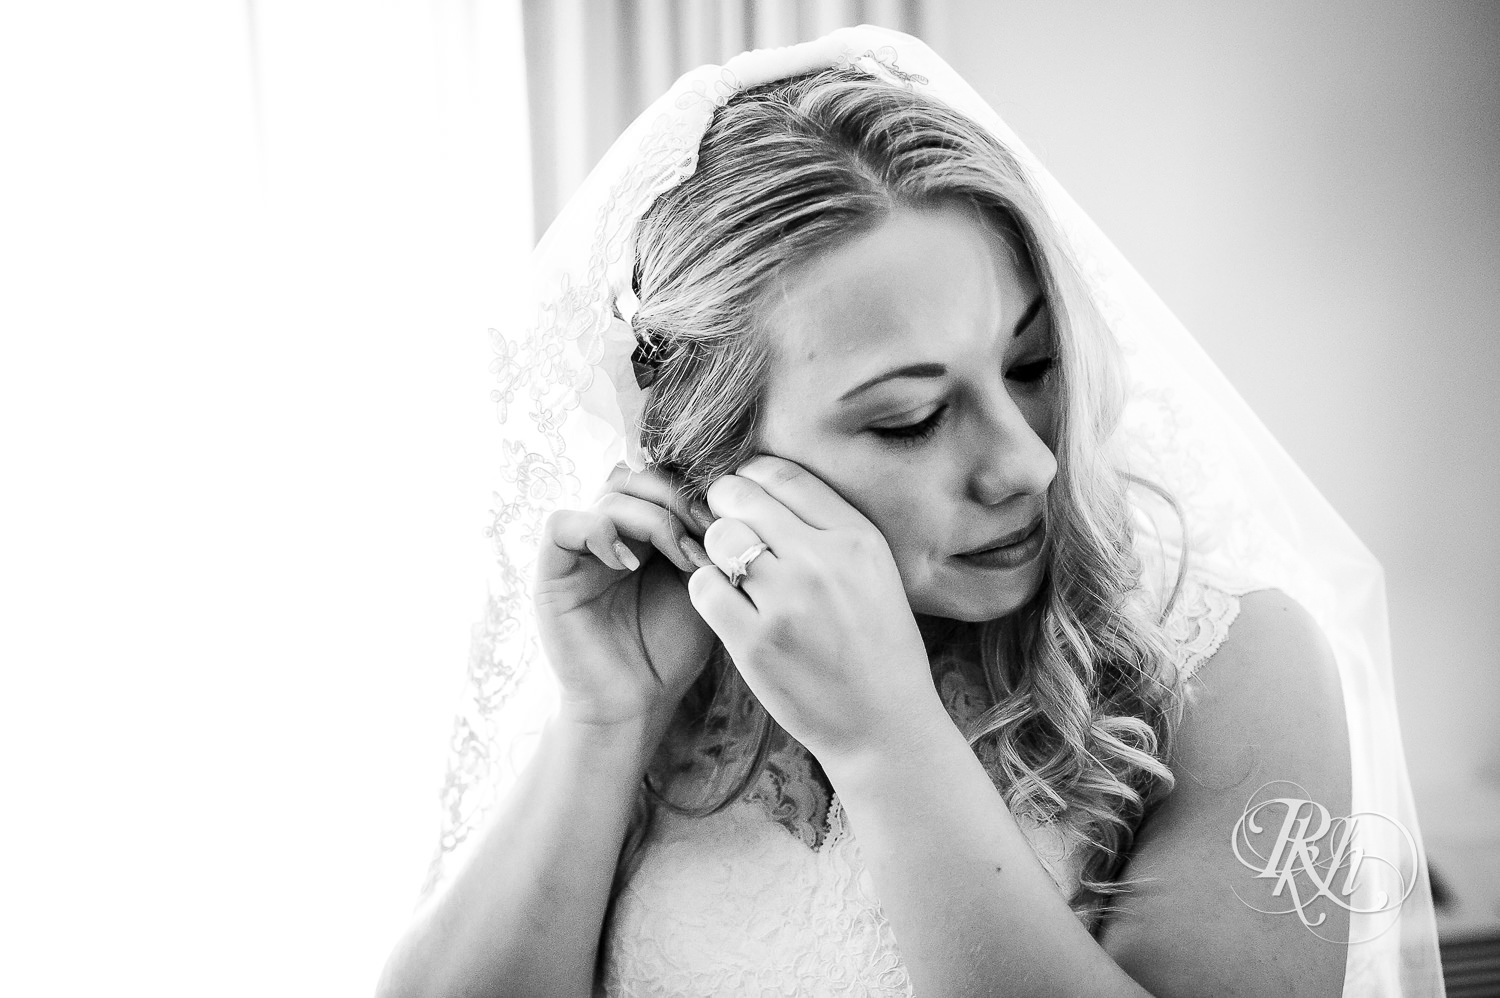 Bride putting on earrings before the wedding at North Metro Event Center in Shoreview, Minnesota.